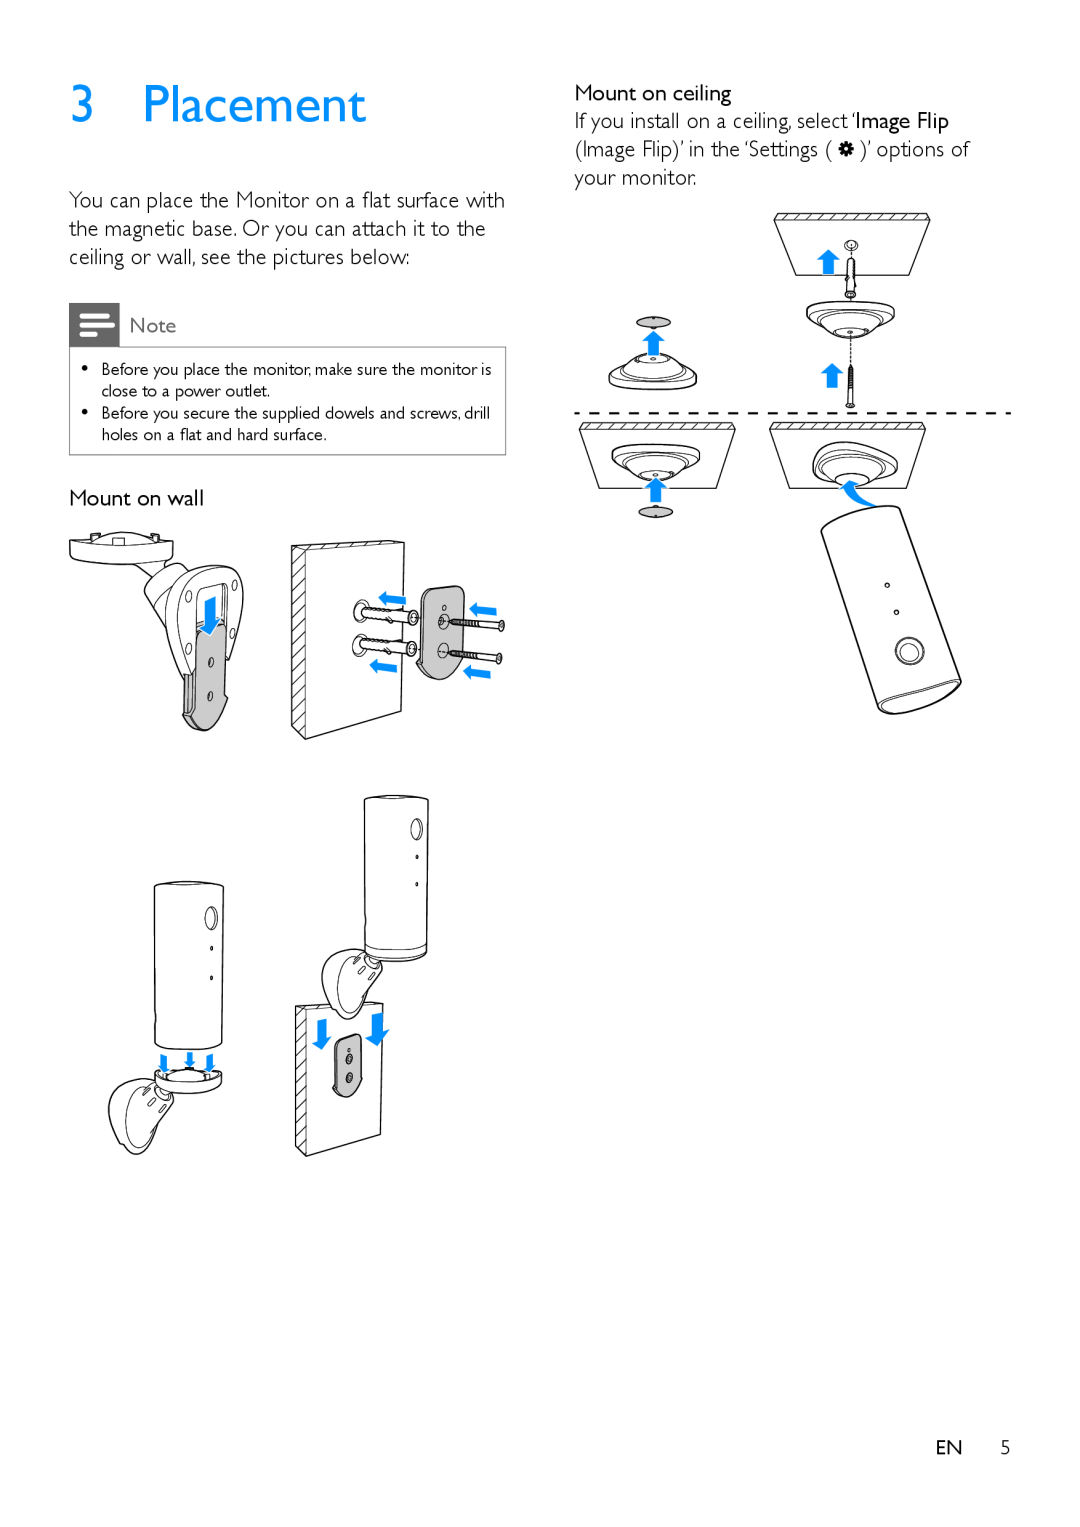 Philips M100 user manual Placement, Mount on wall, Mount on ceiling 